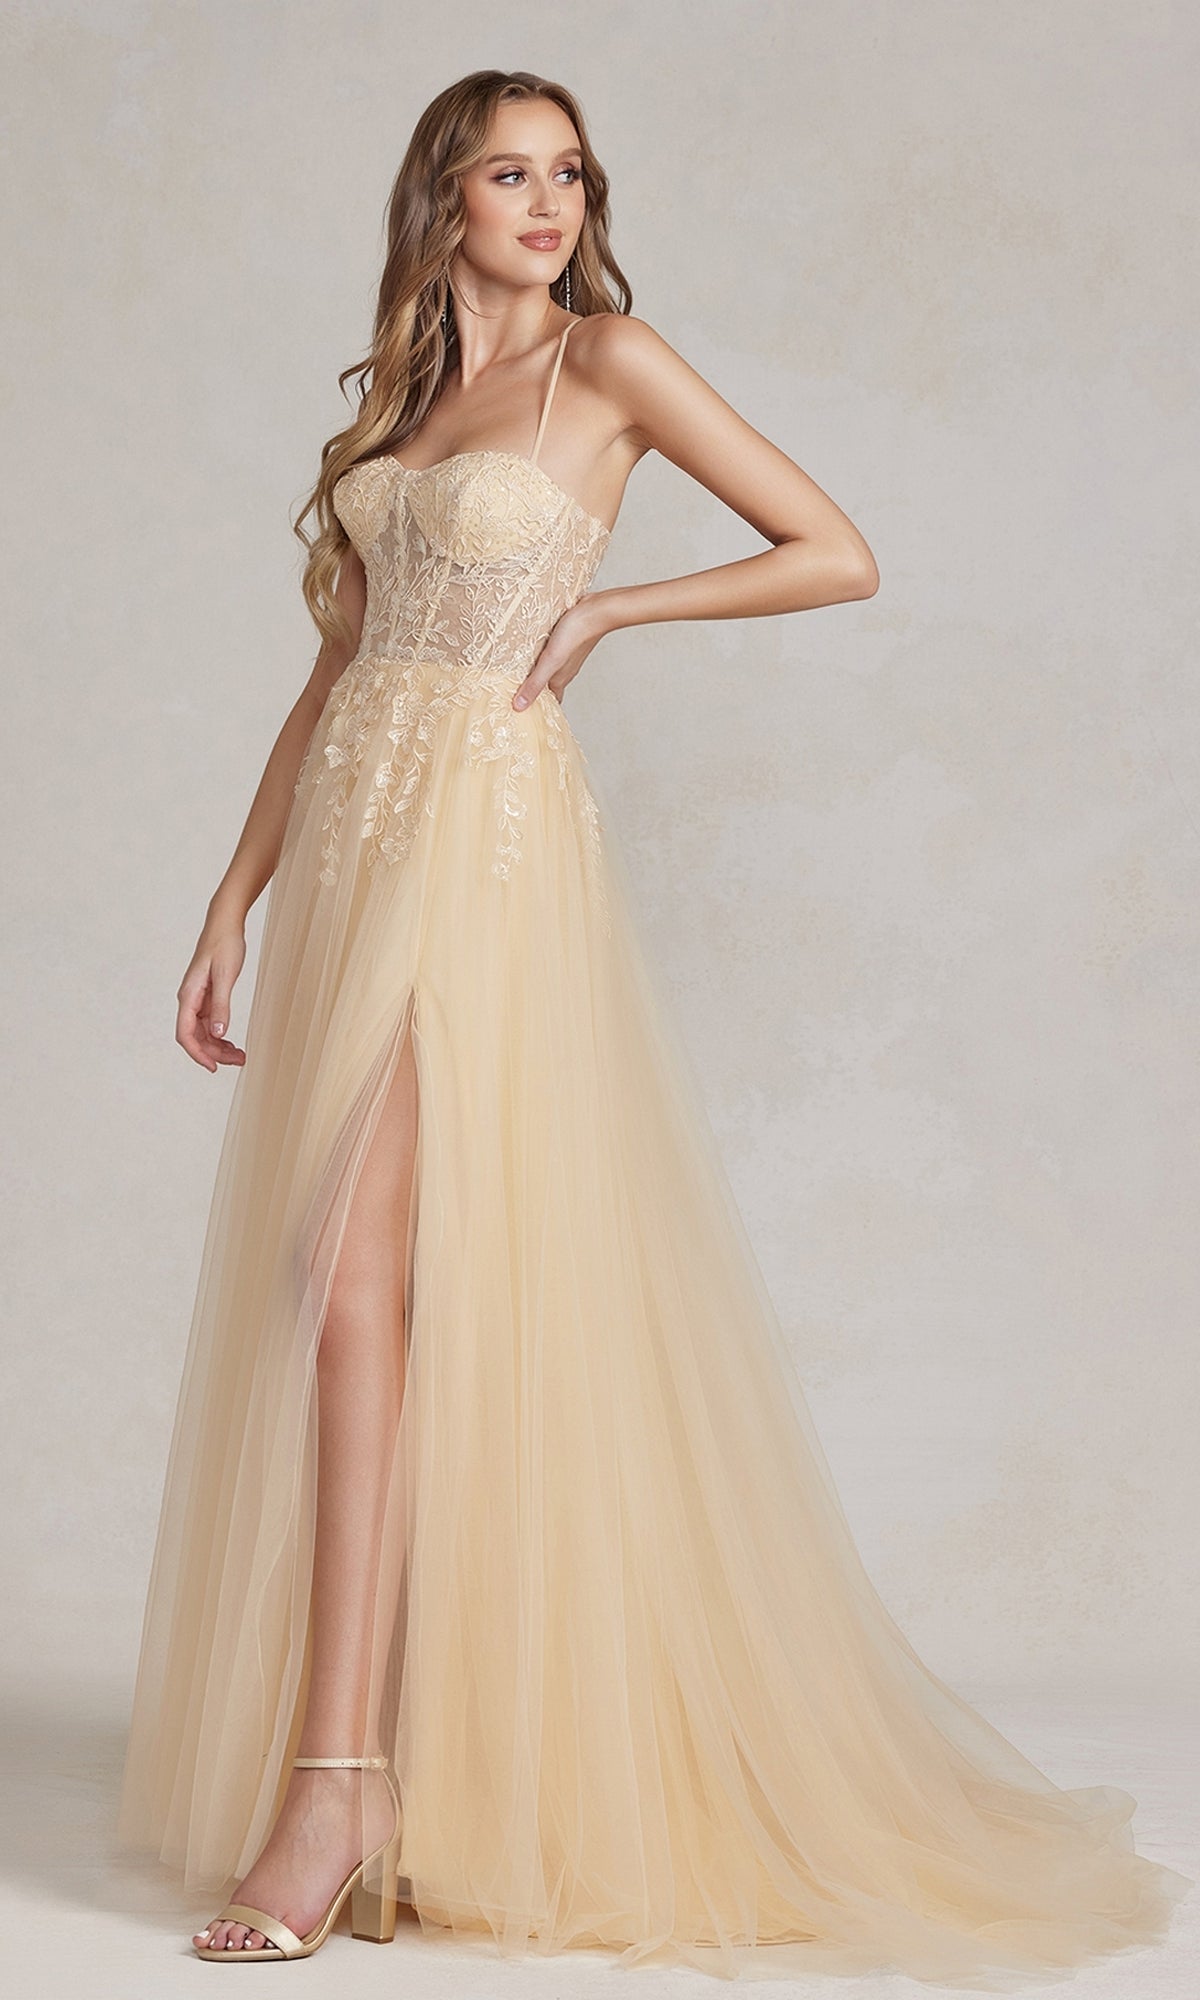 Champagne A-Line Long Lace Prom Dress with Sheer Waist